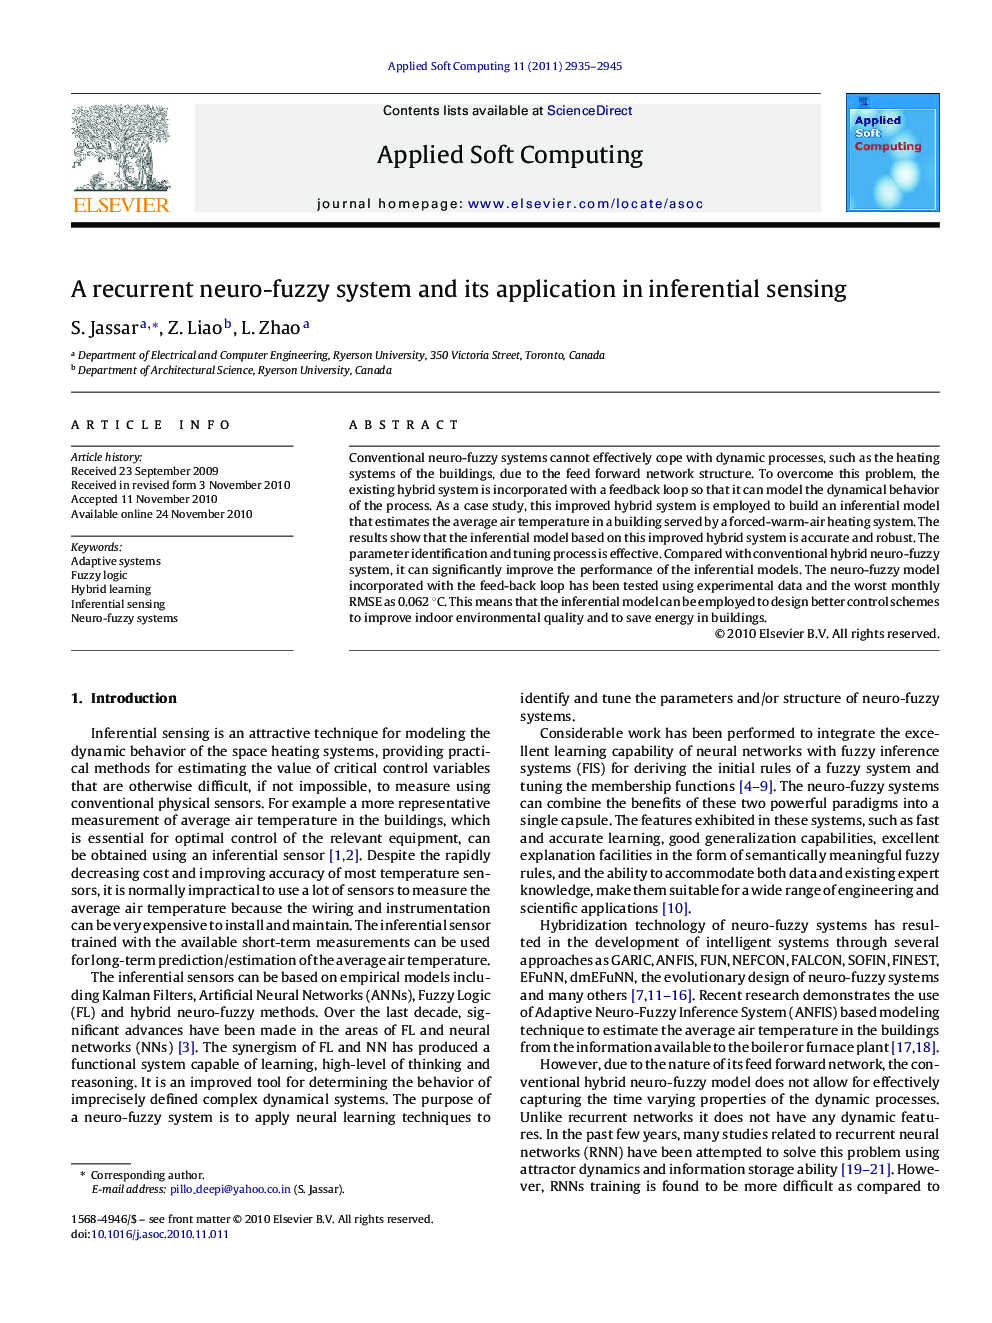 A recurrent neuro-fuzzy system and its application in inferential sensing